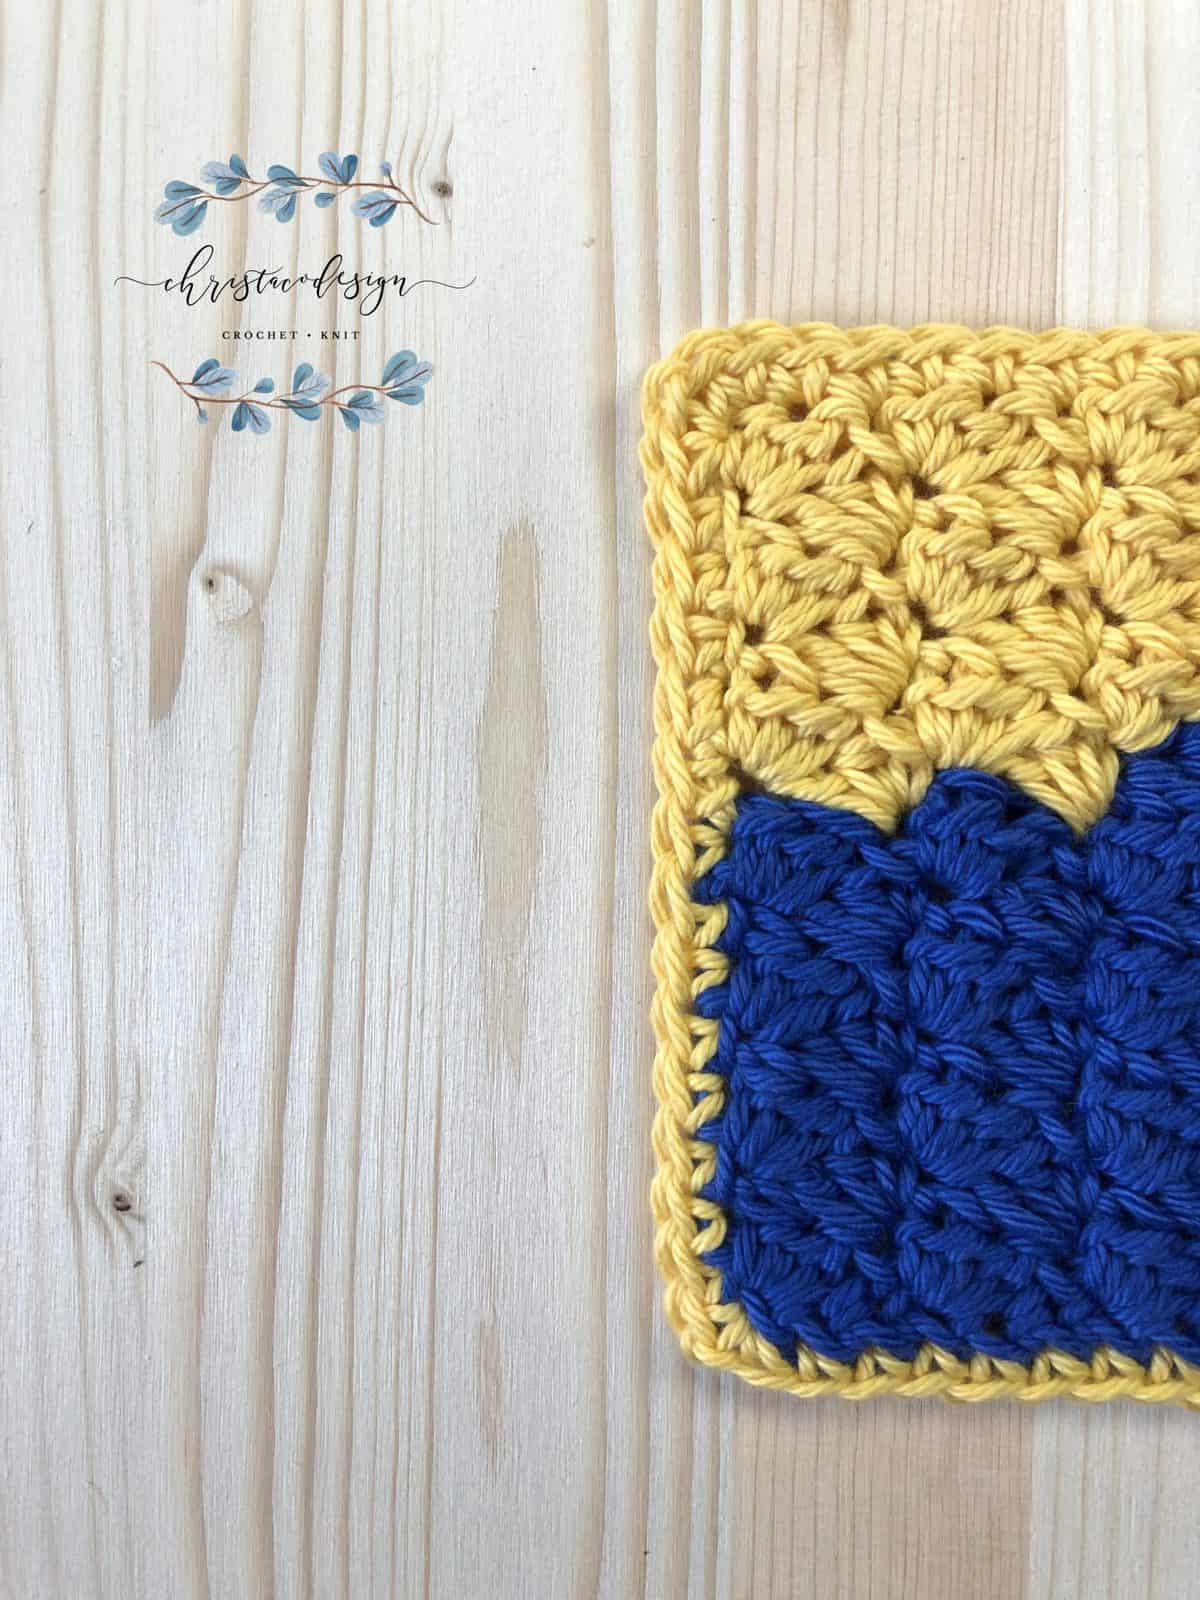 Yellow and blue crochet washcloth on wood table.